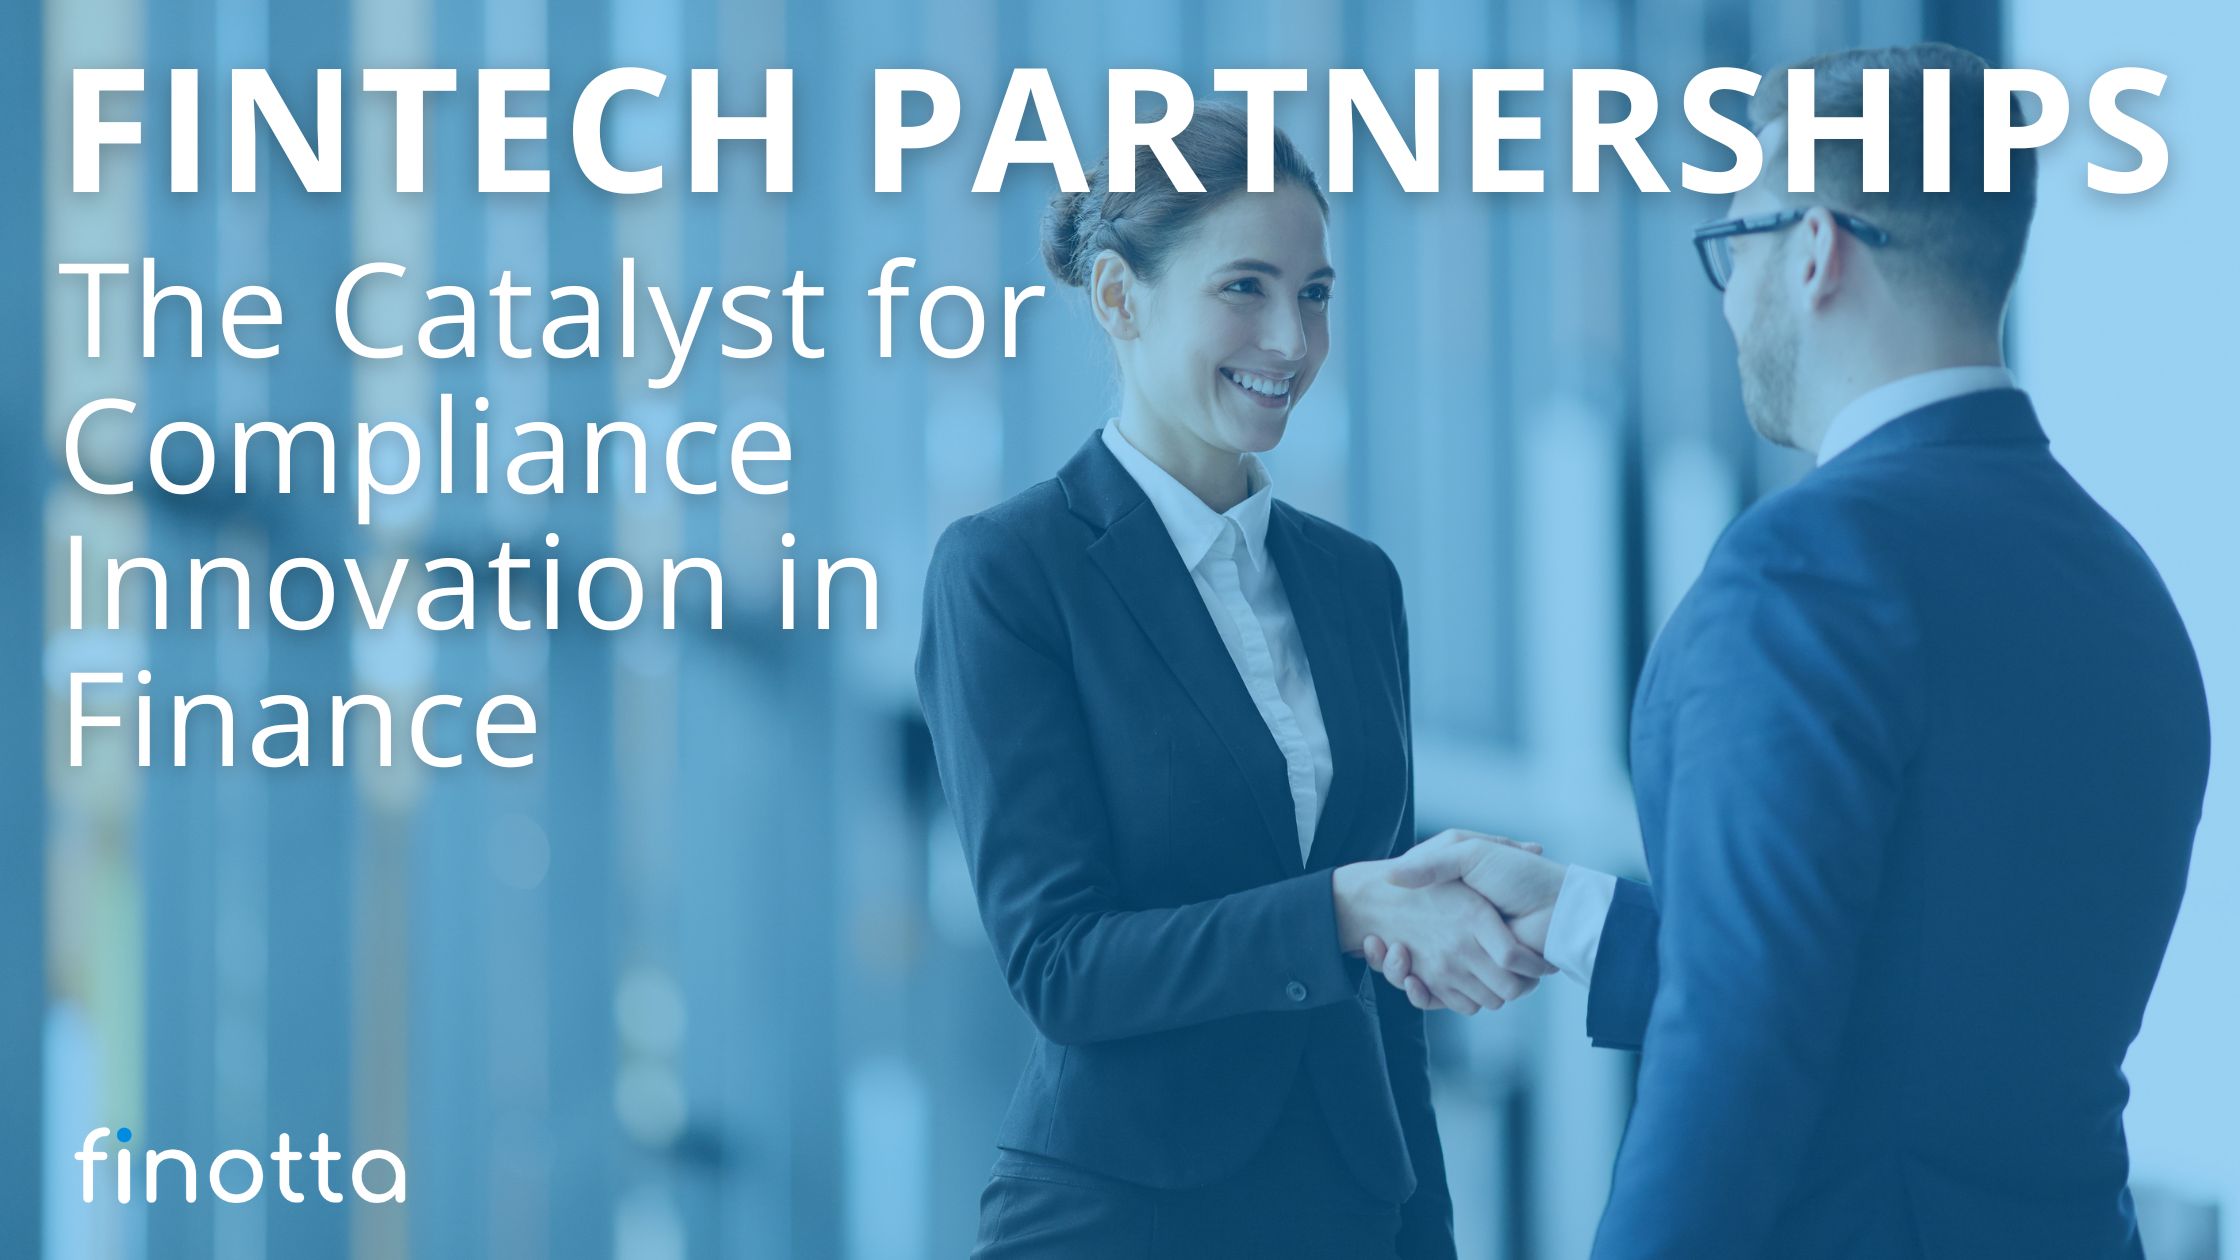 Fintech Partnerships: The Catalyst for Compliance Innovation in Fintech